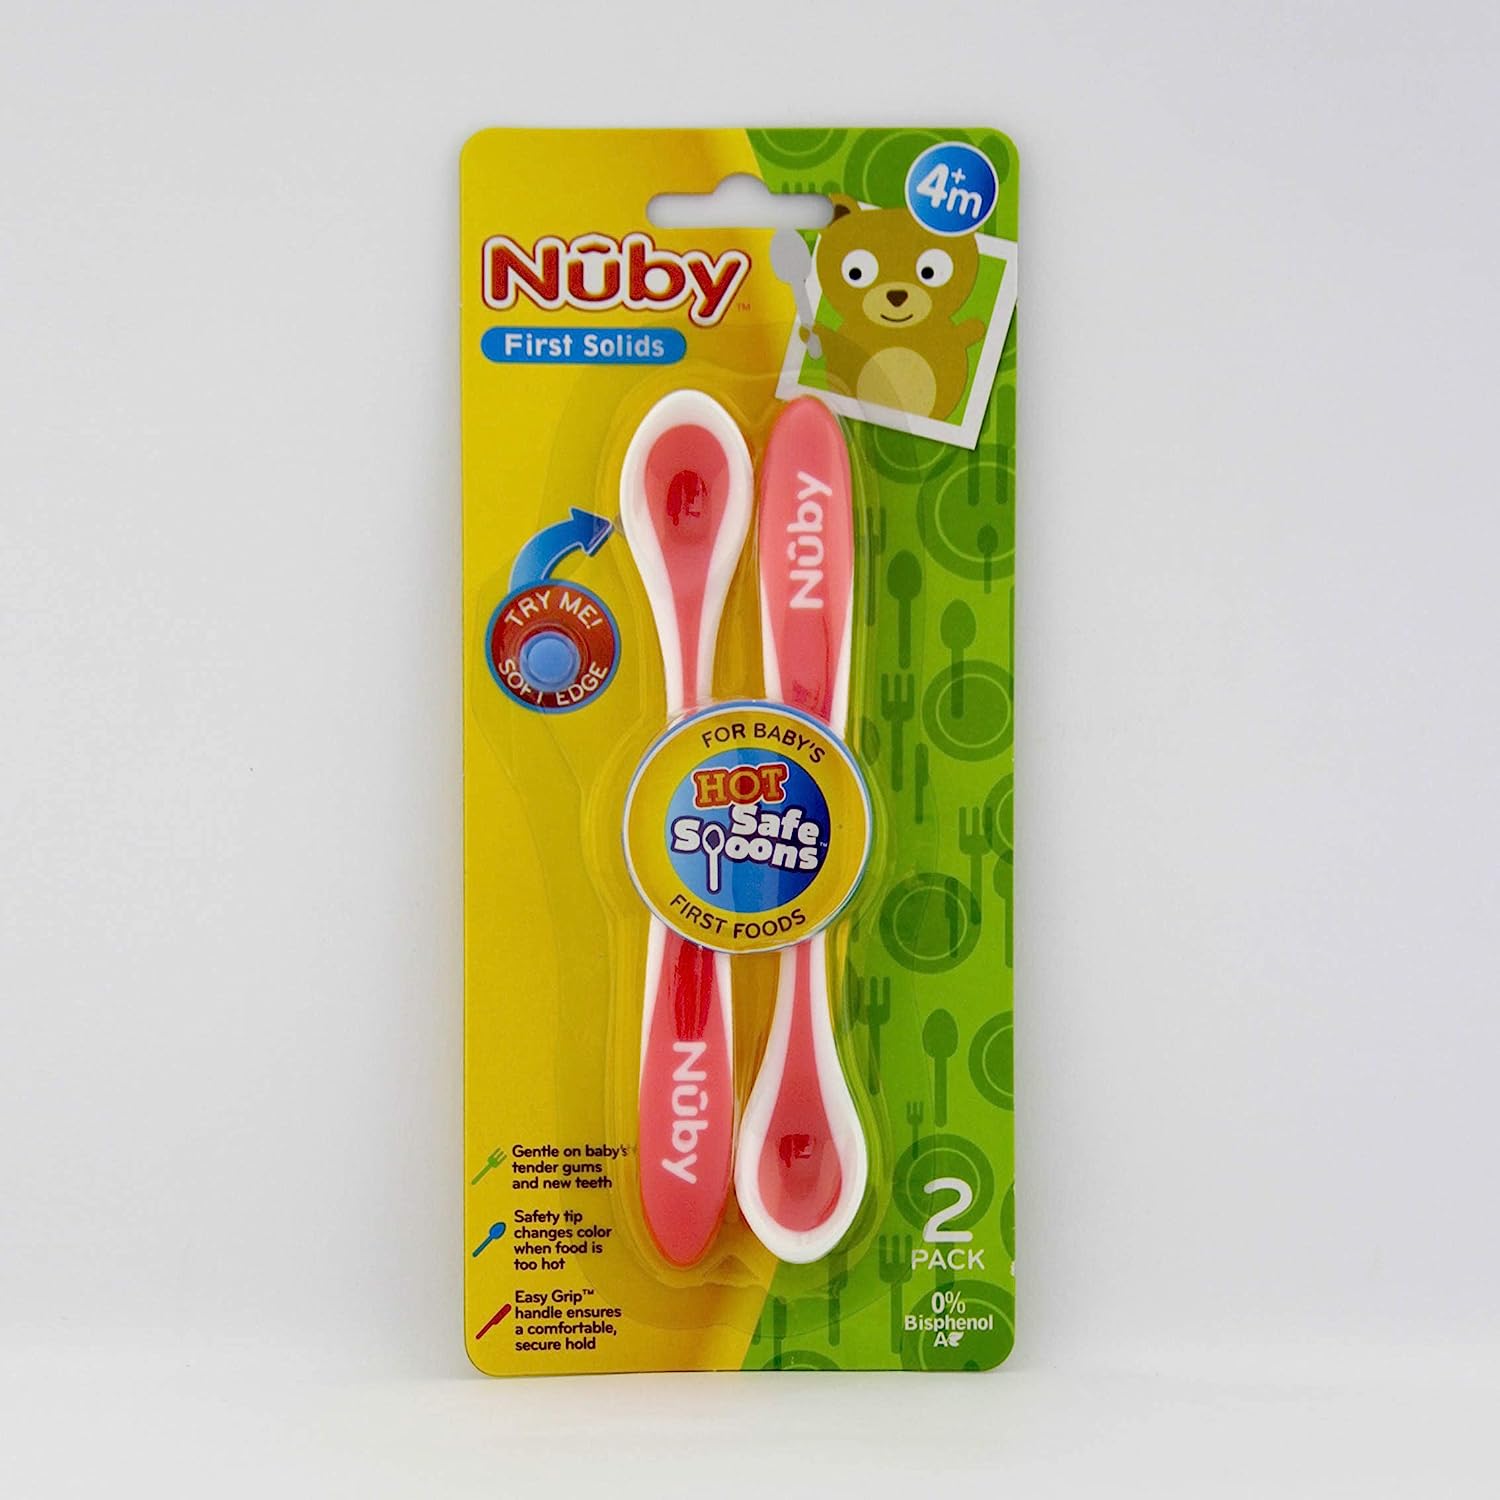 Get trendy with Lot de 2 Cuillères thermosensibles - Nuby - Soins bébé, Cuillères available at BABY PREMA. Grab yours for €3.45 today!